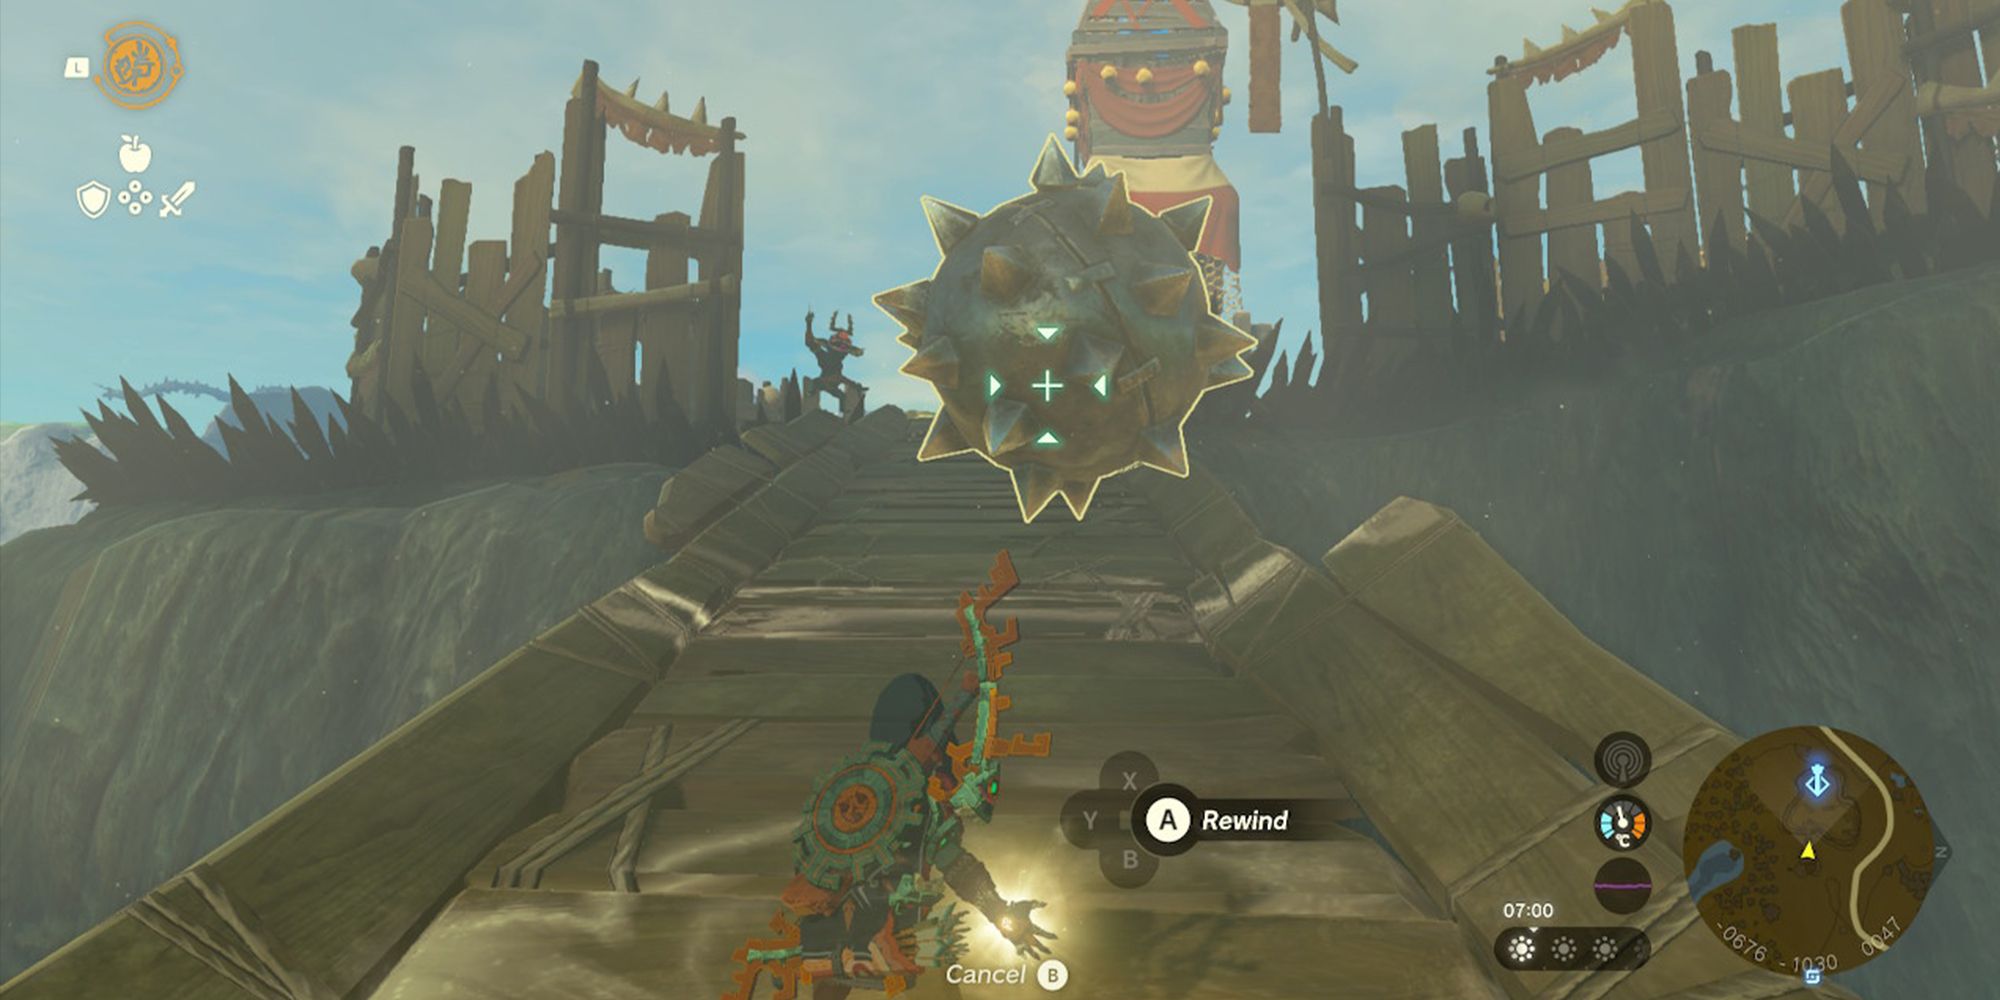 Recalling Spiked Ball at Hyrule Field Skyview Tower